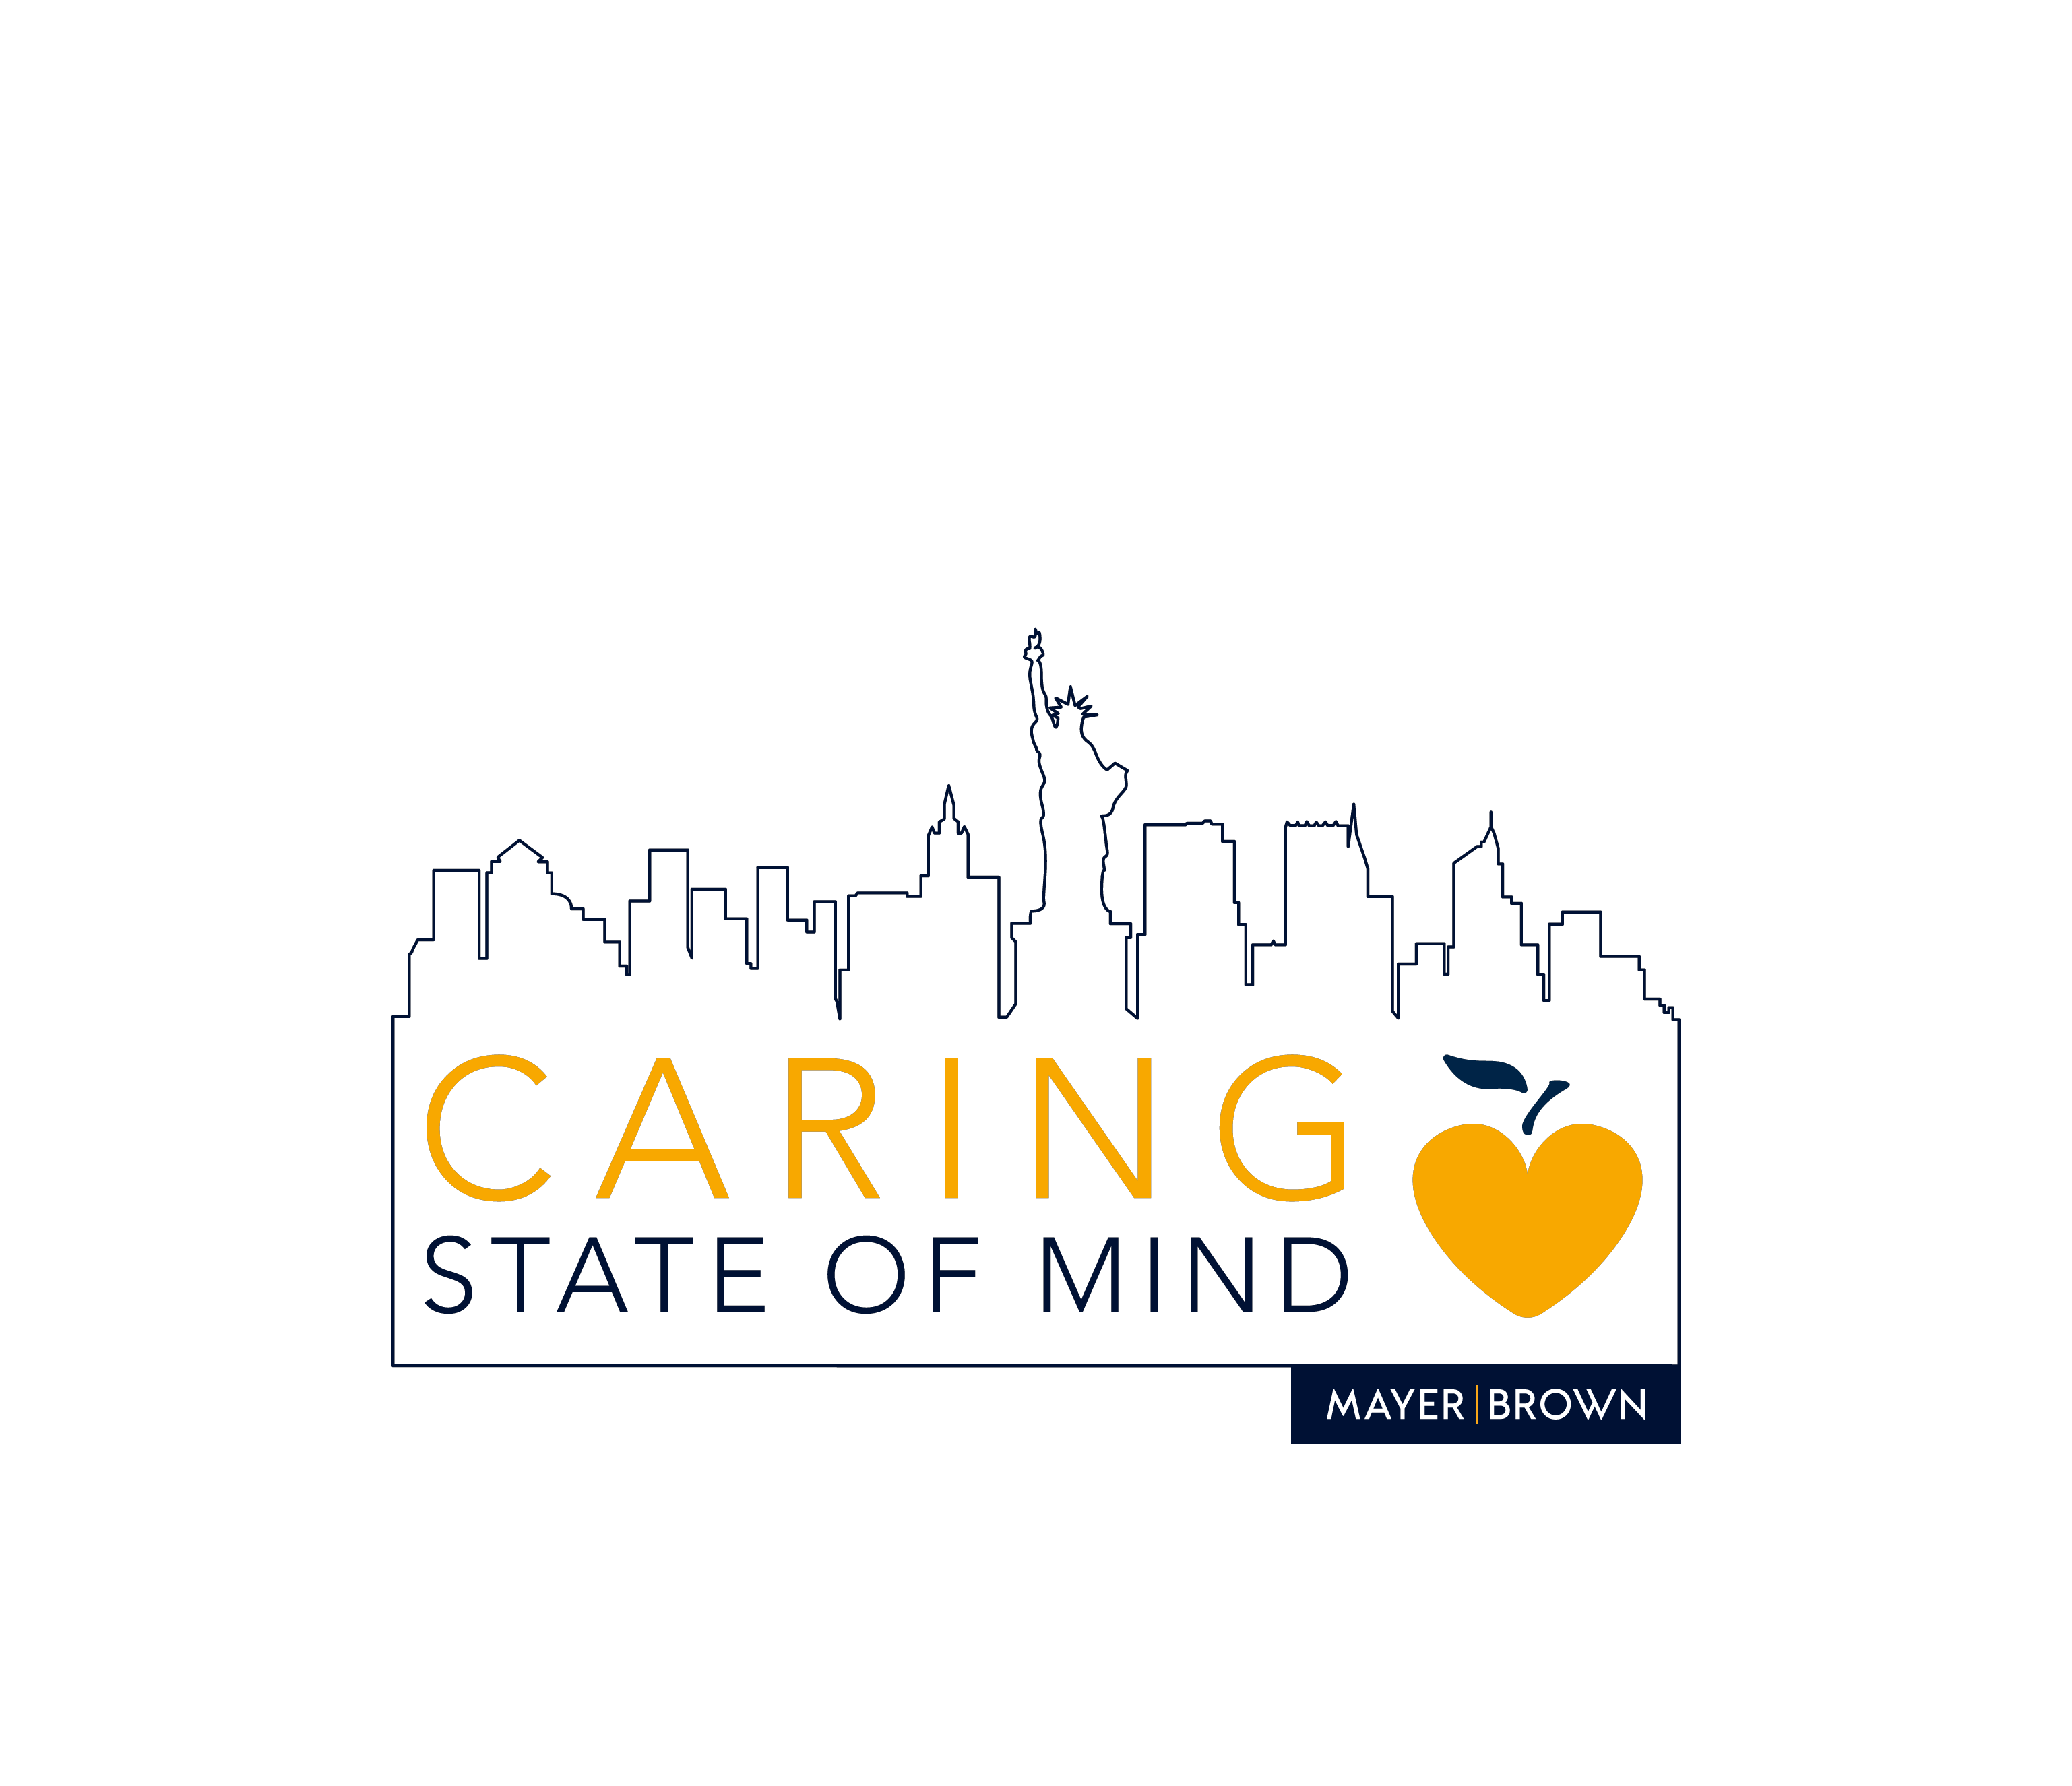 Caring State of Mind t-shirt design